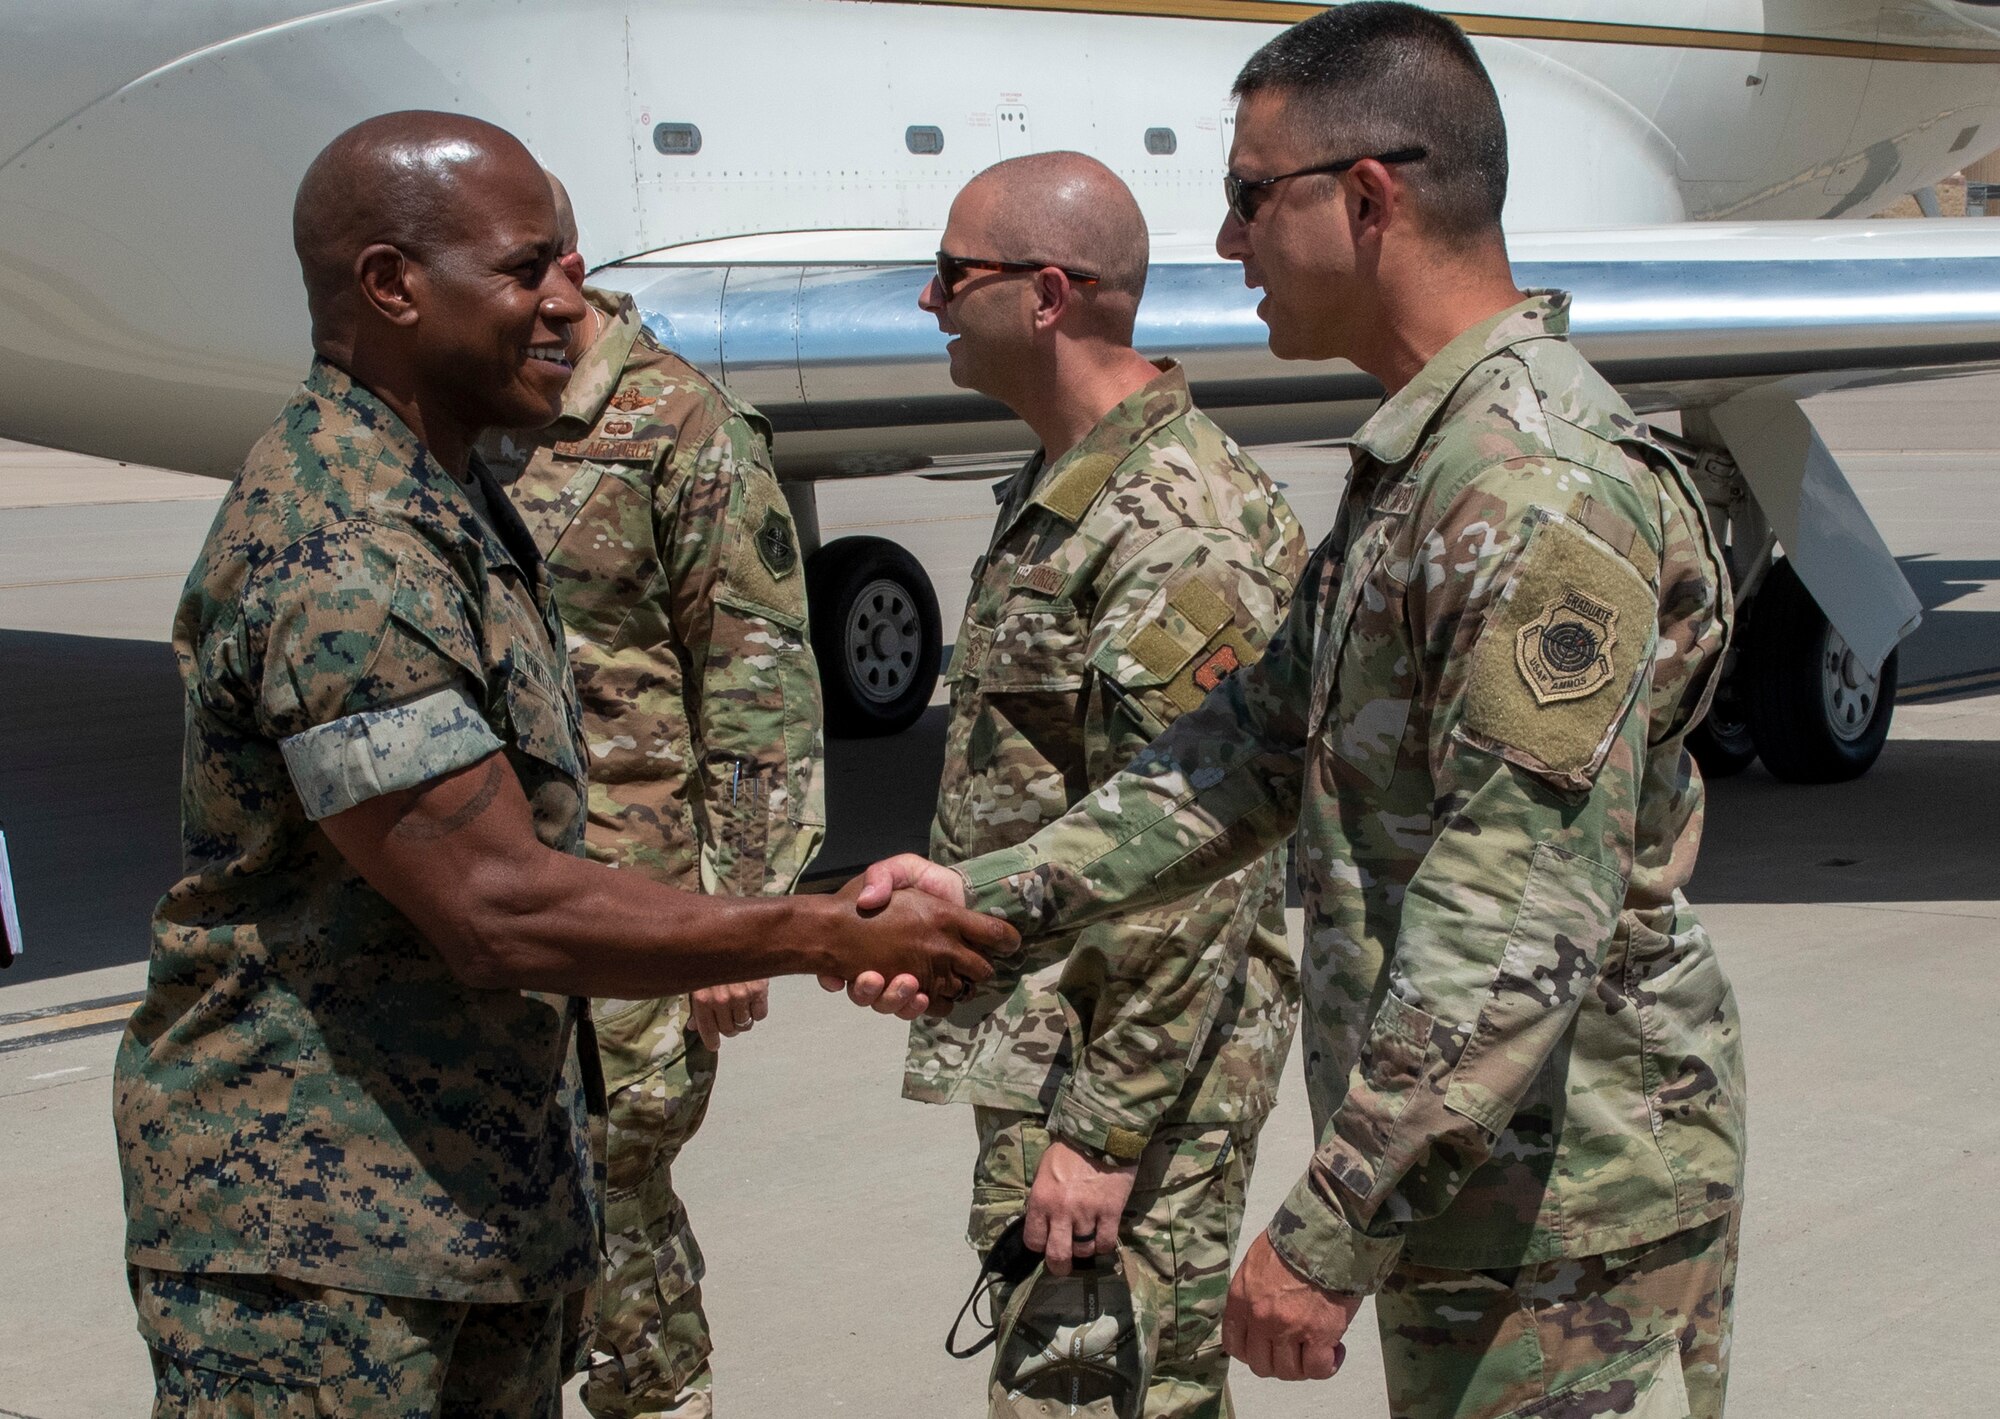 Sgt. Maj. James Porterfield, left, Command Senior Enlisted Leader, North American Aerospace Defense Command and U.S. Northern Command, greets Chief Master Sgt. Eric West, Task Force - Holloman command chief, upon arrival at Holloman Air Force Base, New Mexico, Sept. 7, 2021.  The senior enlisted leaders joined with Gen. Glen VanHerck, Commander, NORAD and USNORTHCOM; Mr. Terry Todd, Department of Homeland Security's Federal Coordinator at Holloman AFB; Mr. Joe Parente, Department of State Team Lead; Rep. Melanie Stansbury (D-NM-1) and Rep. Yvette Herrell (R-NM-2), touring housing facilities and other support functions for the Afghan evacuees on the installation. (U.S. Air Force photo by Staff Sgt. Kenneth Boyton)